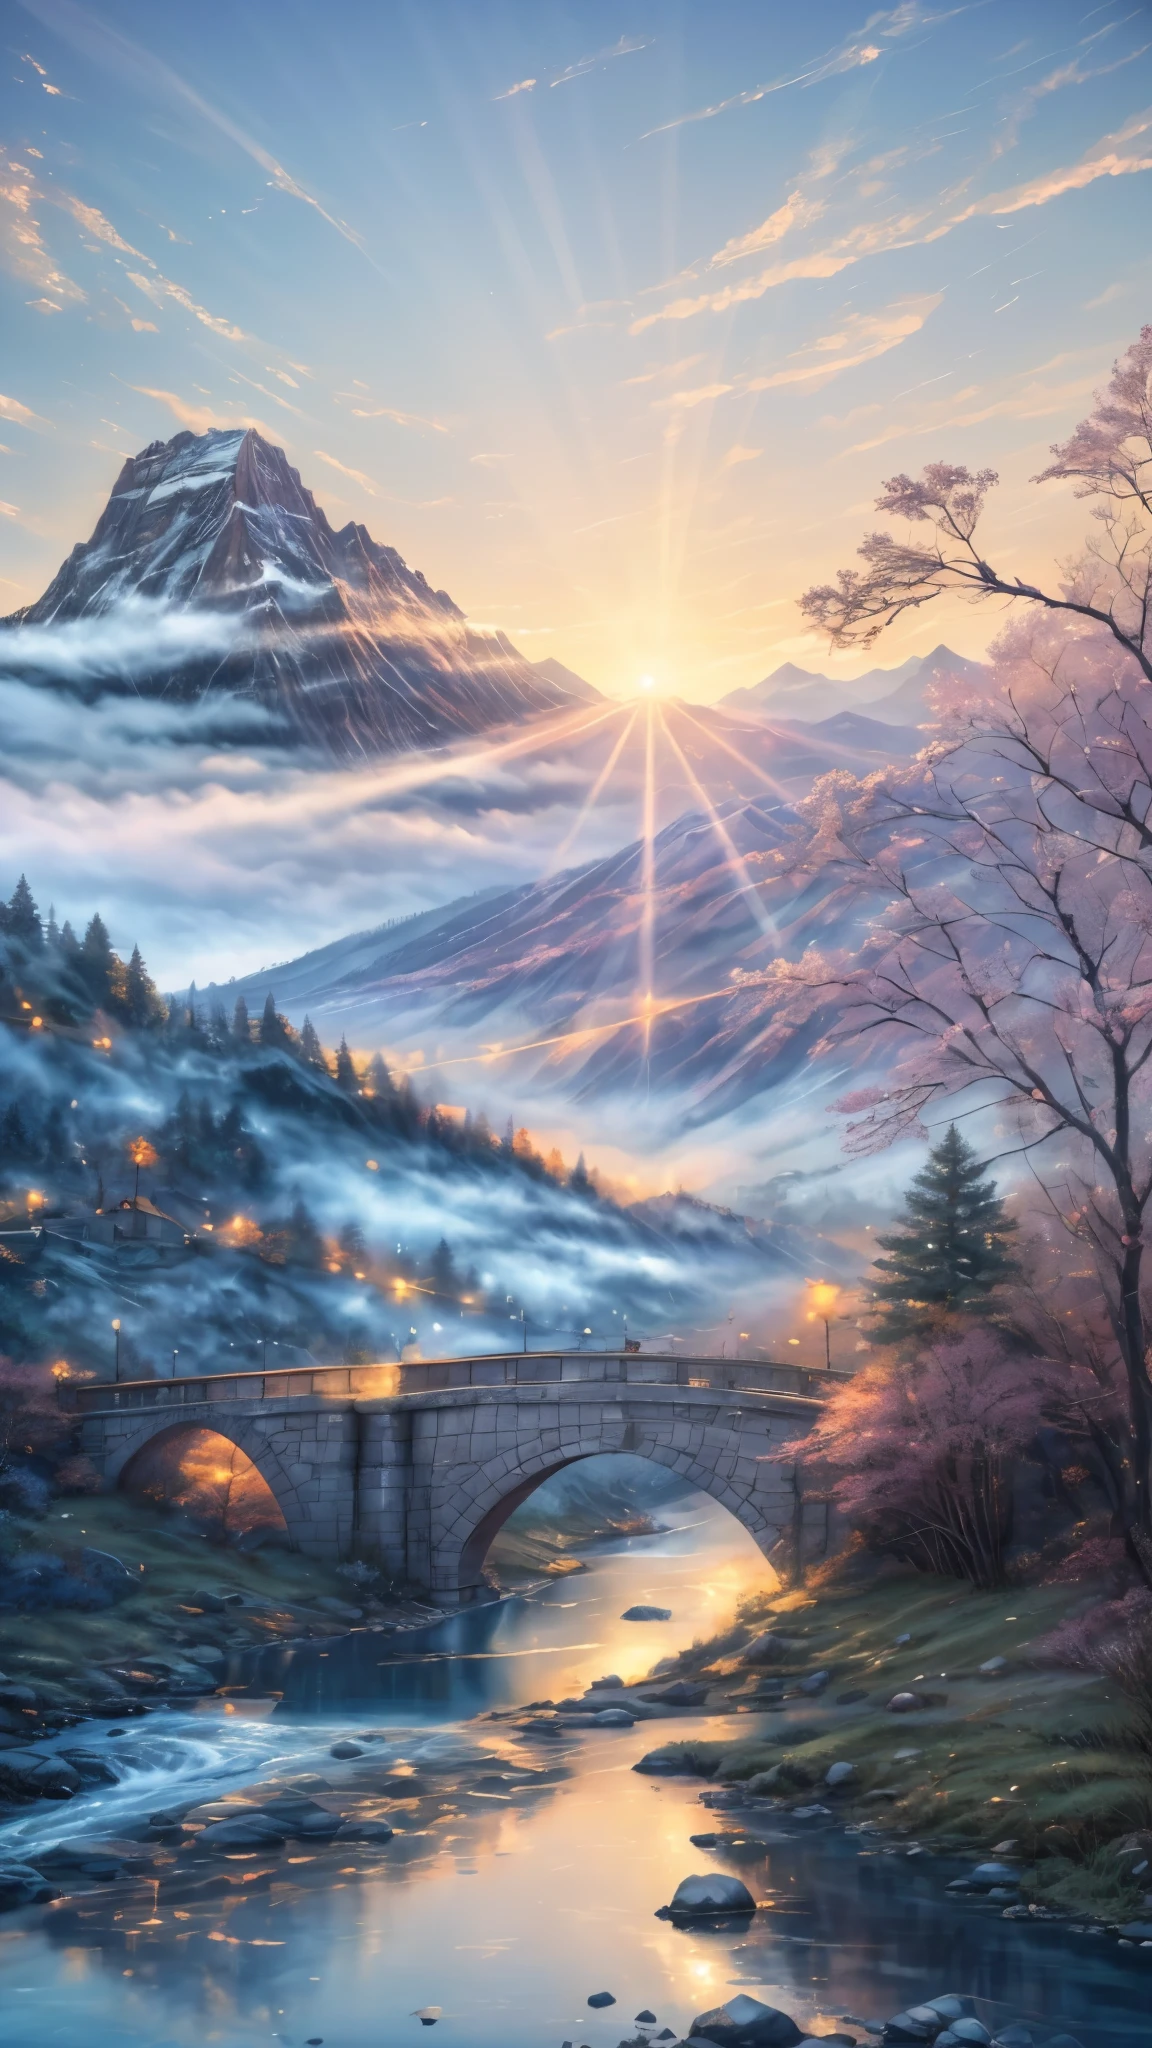 painting of a bridge over a river with a mountain in the background, beautiful art uhd 4 k, scenery artwork, anime art wallpaper 4k, anime art wallpaper 4 k, detailed painting 4 k, 8k high quality detailed art, anime art wallpaper 8 k, 4k detailed art, anime landscape wallpaper, 4k highly detailed digital art, anime beautiful peace scene